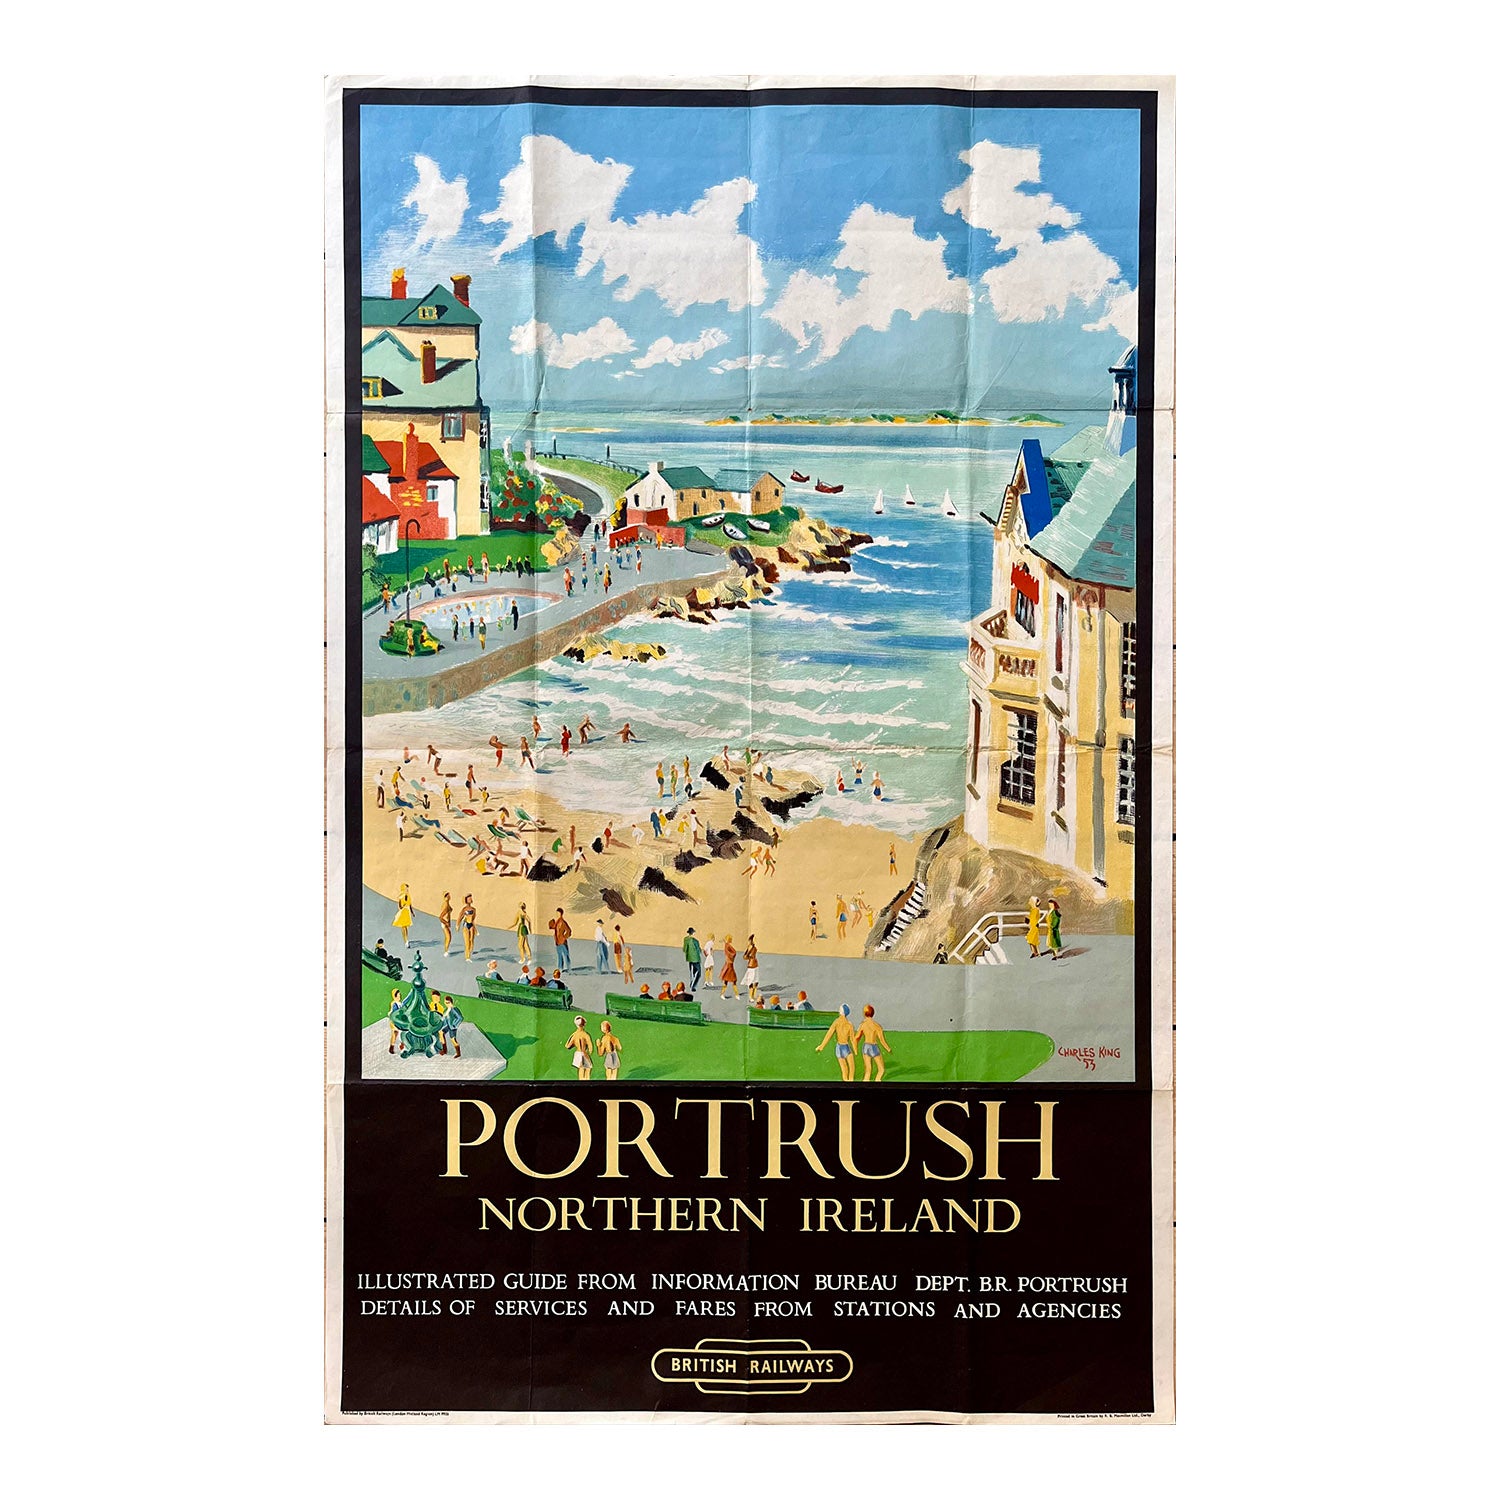 British Railways (London Midland Region) poster advertising Portrush in Northern Irelands, painted by Charles King and published in 1955. A charming view of the bay overlooked by seaside hotels and cottages, with holiday makers enjoying the beach and surrounding area